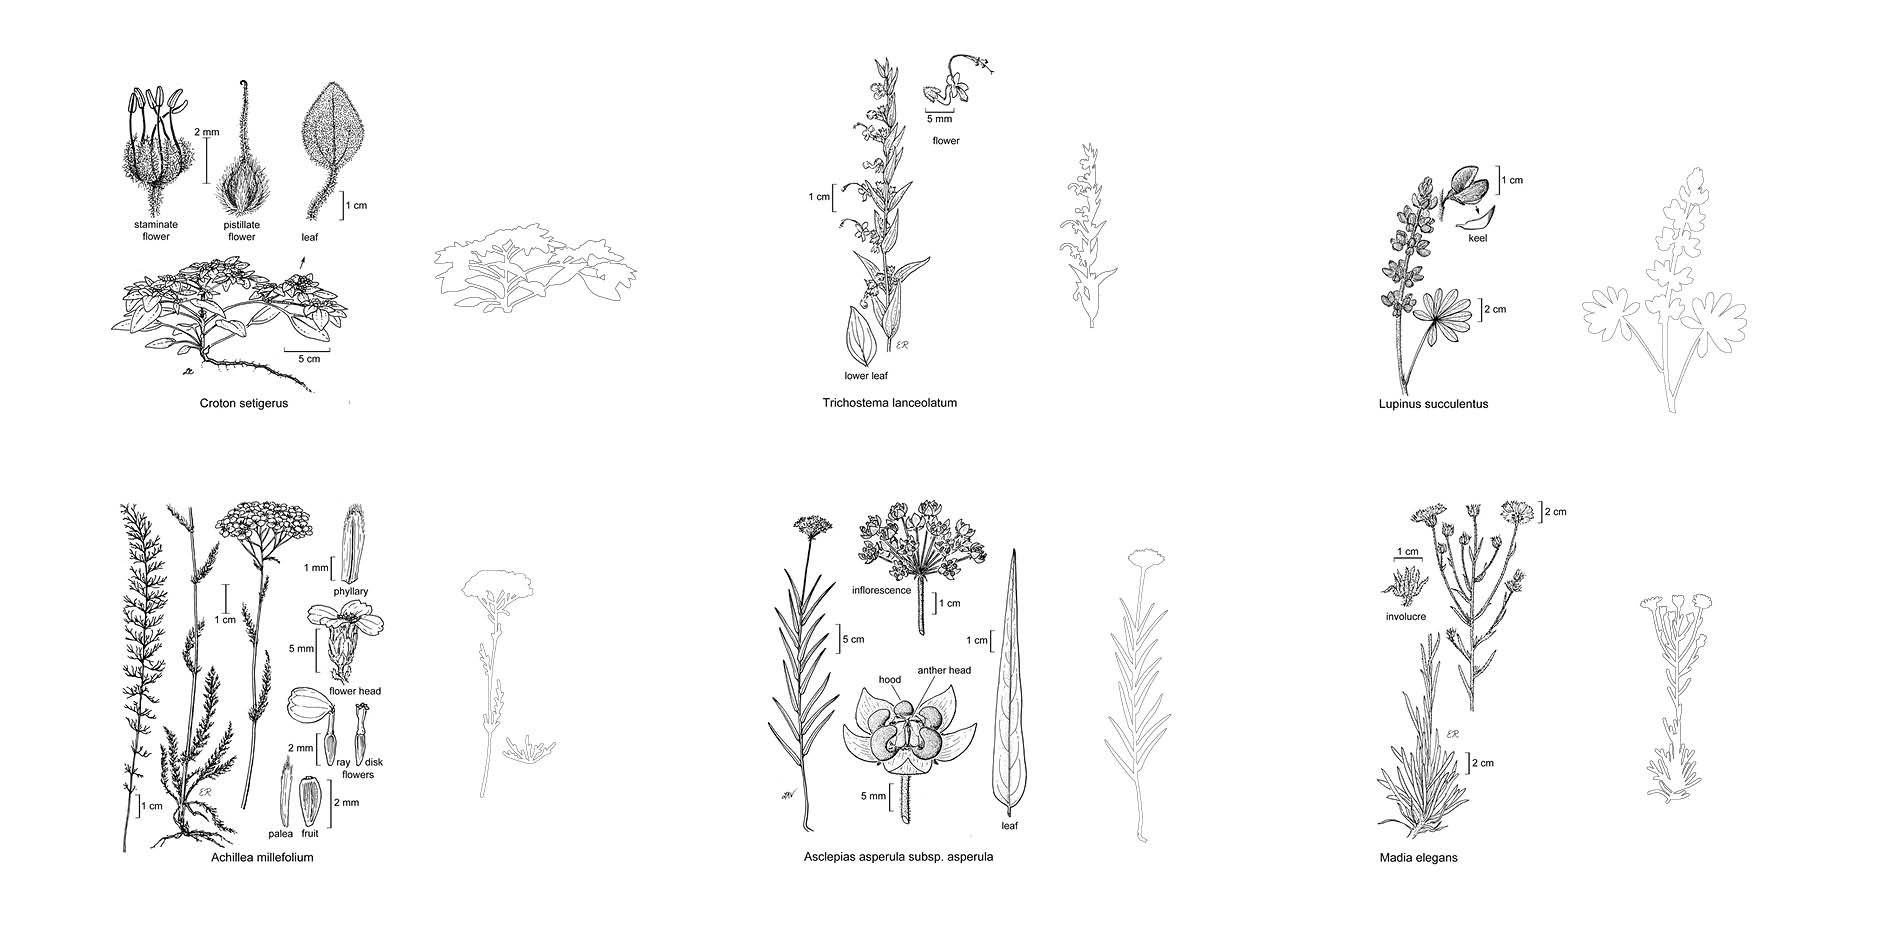 Sourcing the Botanical Drawings